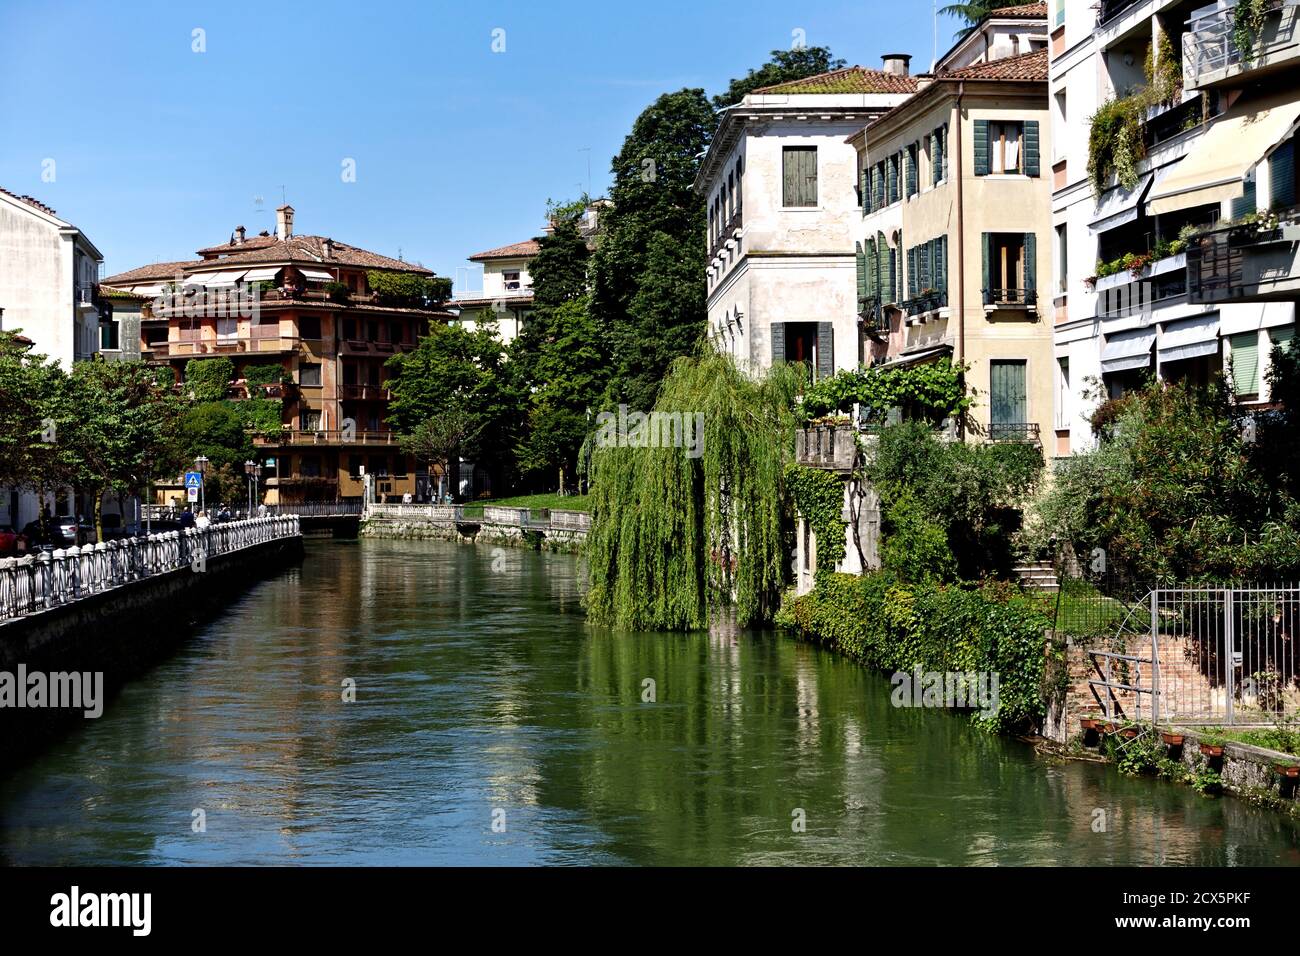 Glimpse of typical Venetian buildings along the river Sile, Riviera Santa Margherita. Weeping willow tree. Treviso, Veneto, Italy, Europe. Copy space. Stock Photo